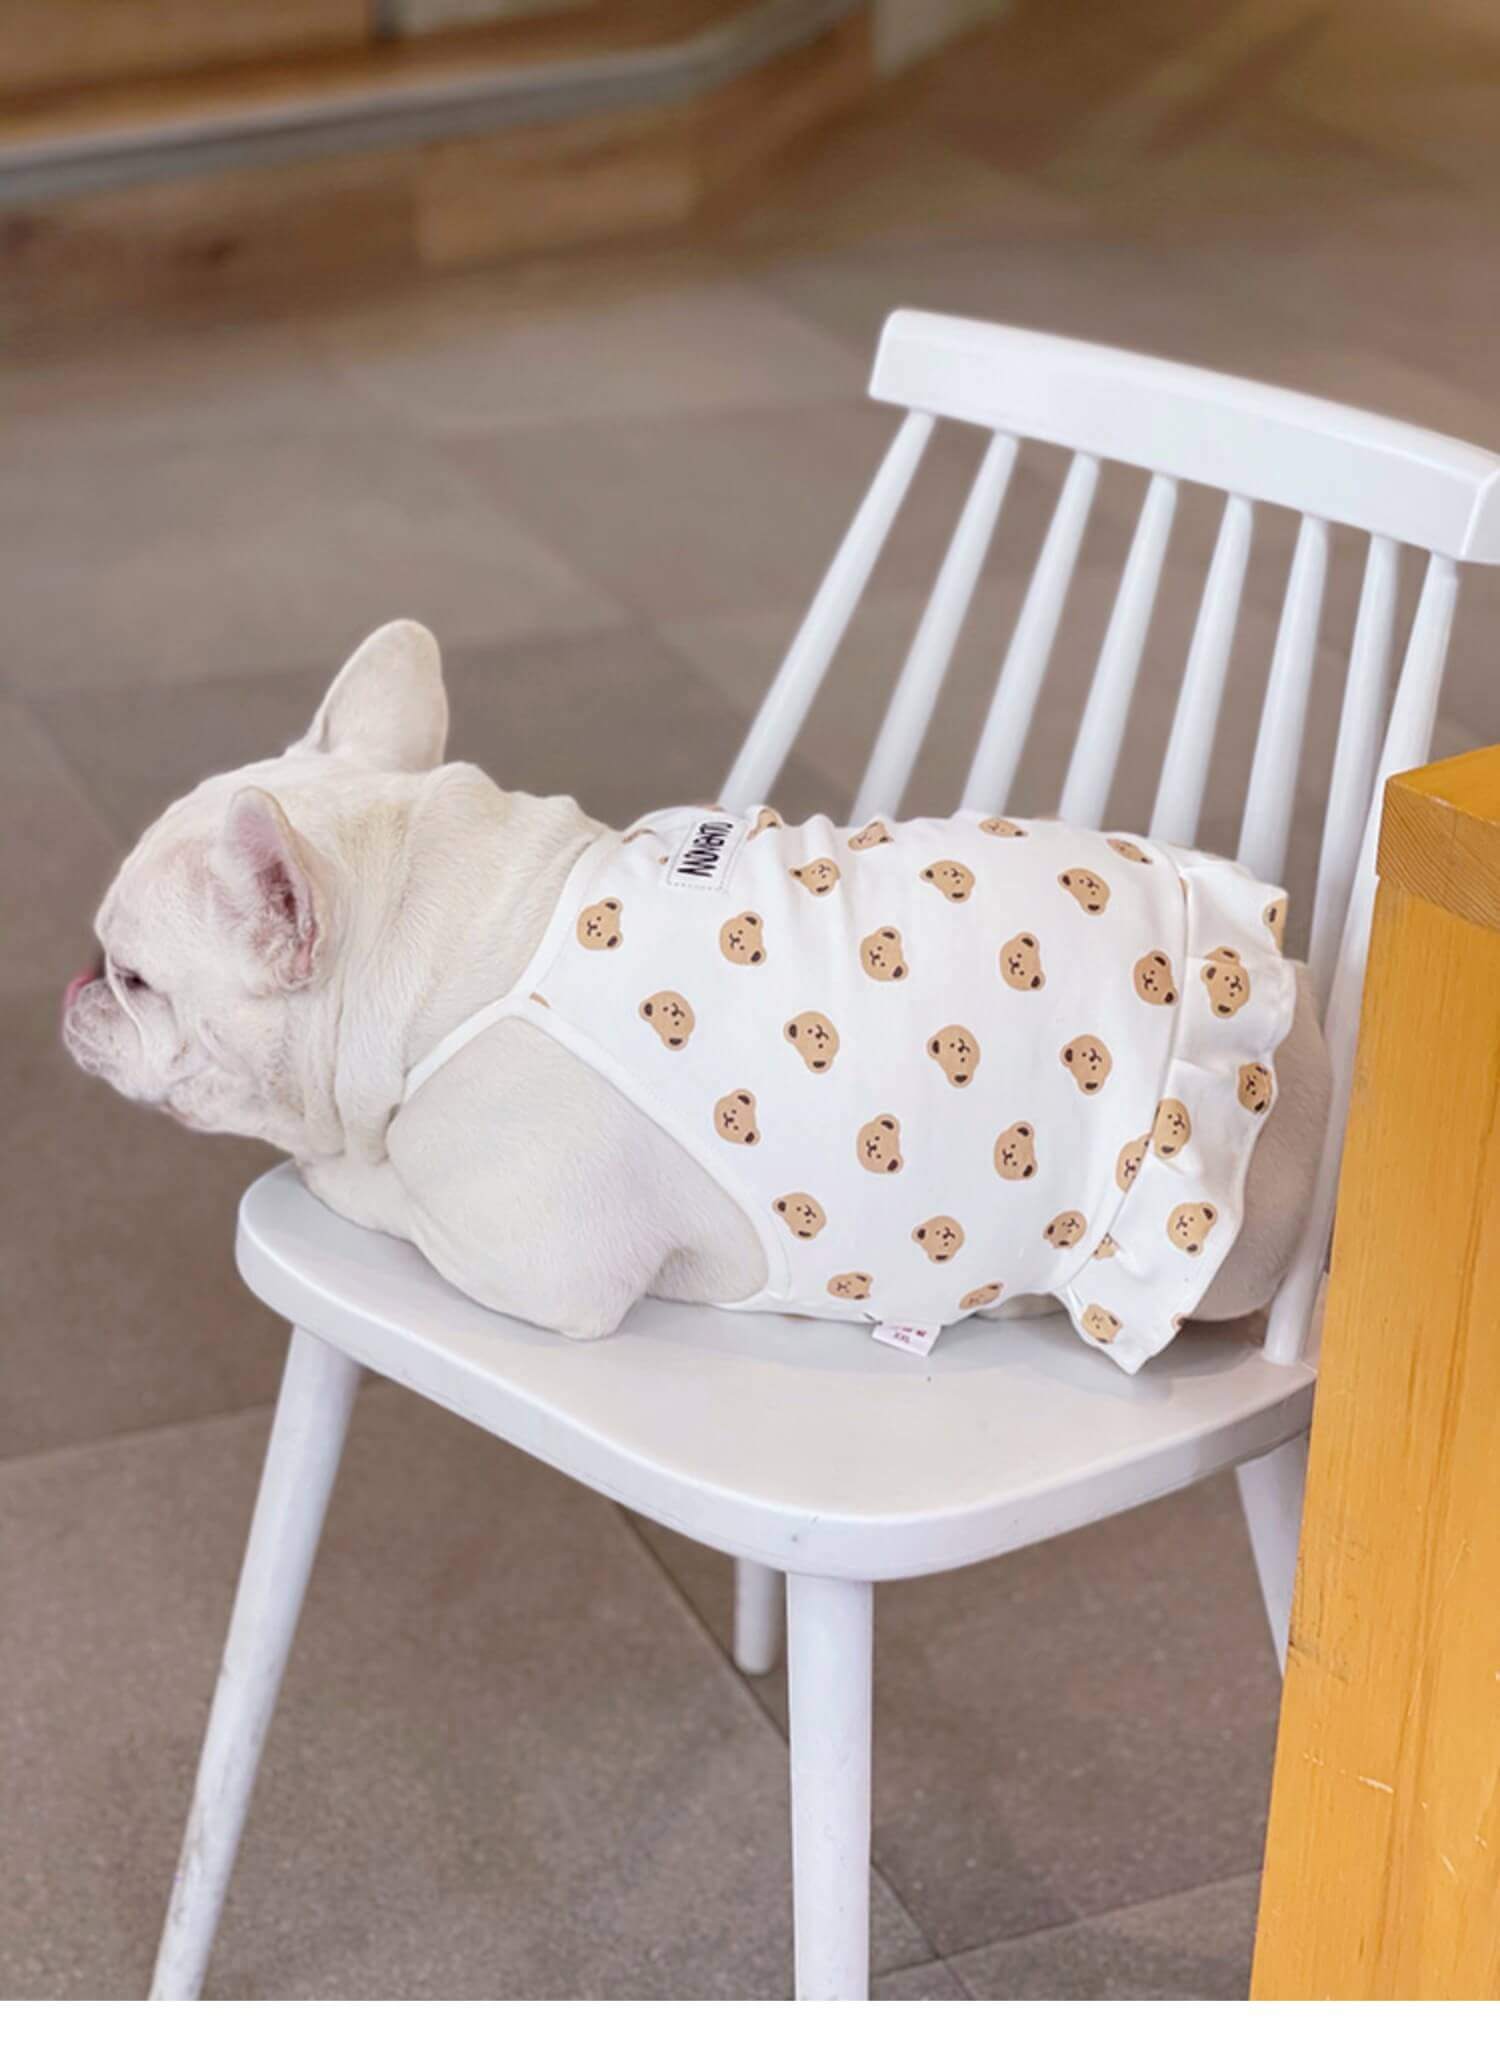 Dog Cotton Bear Dress for Small Medium Dogs by Frenchiely